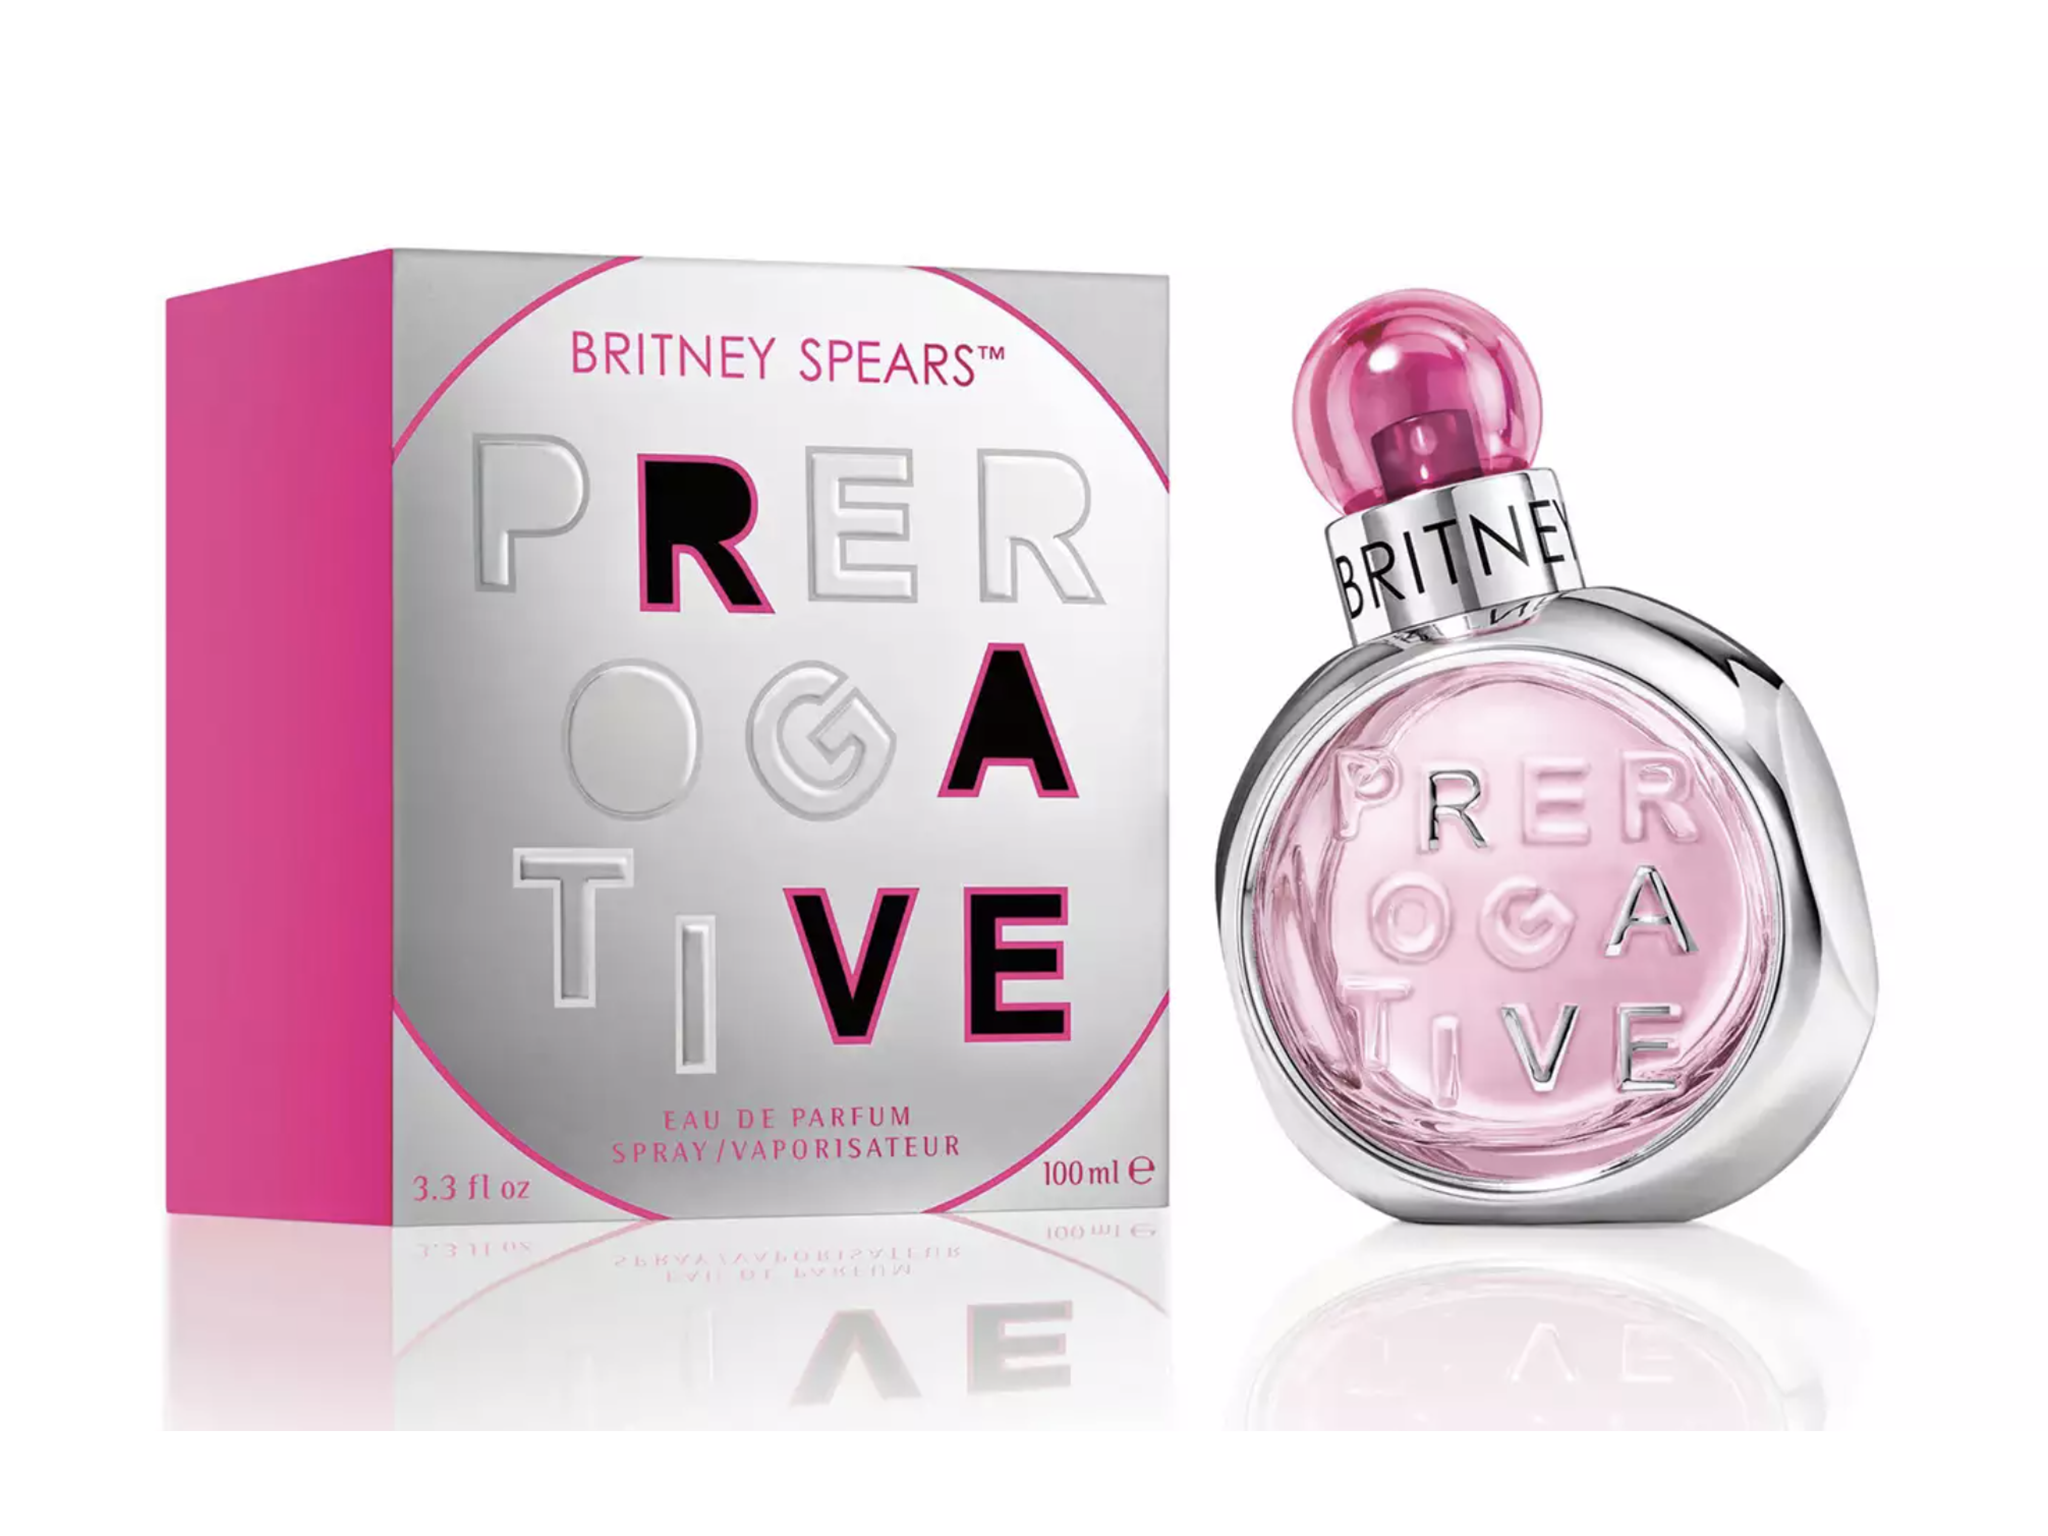 indybest-britney-spears-perfume-Prerogative-rave-fantasy-framing-documentary-2021.png